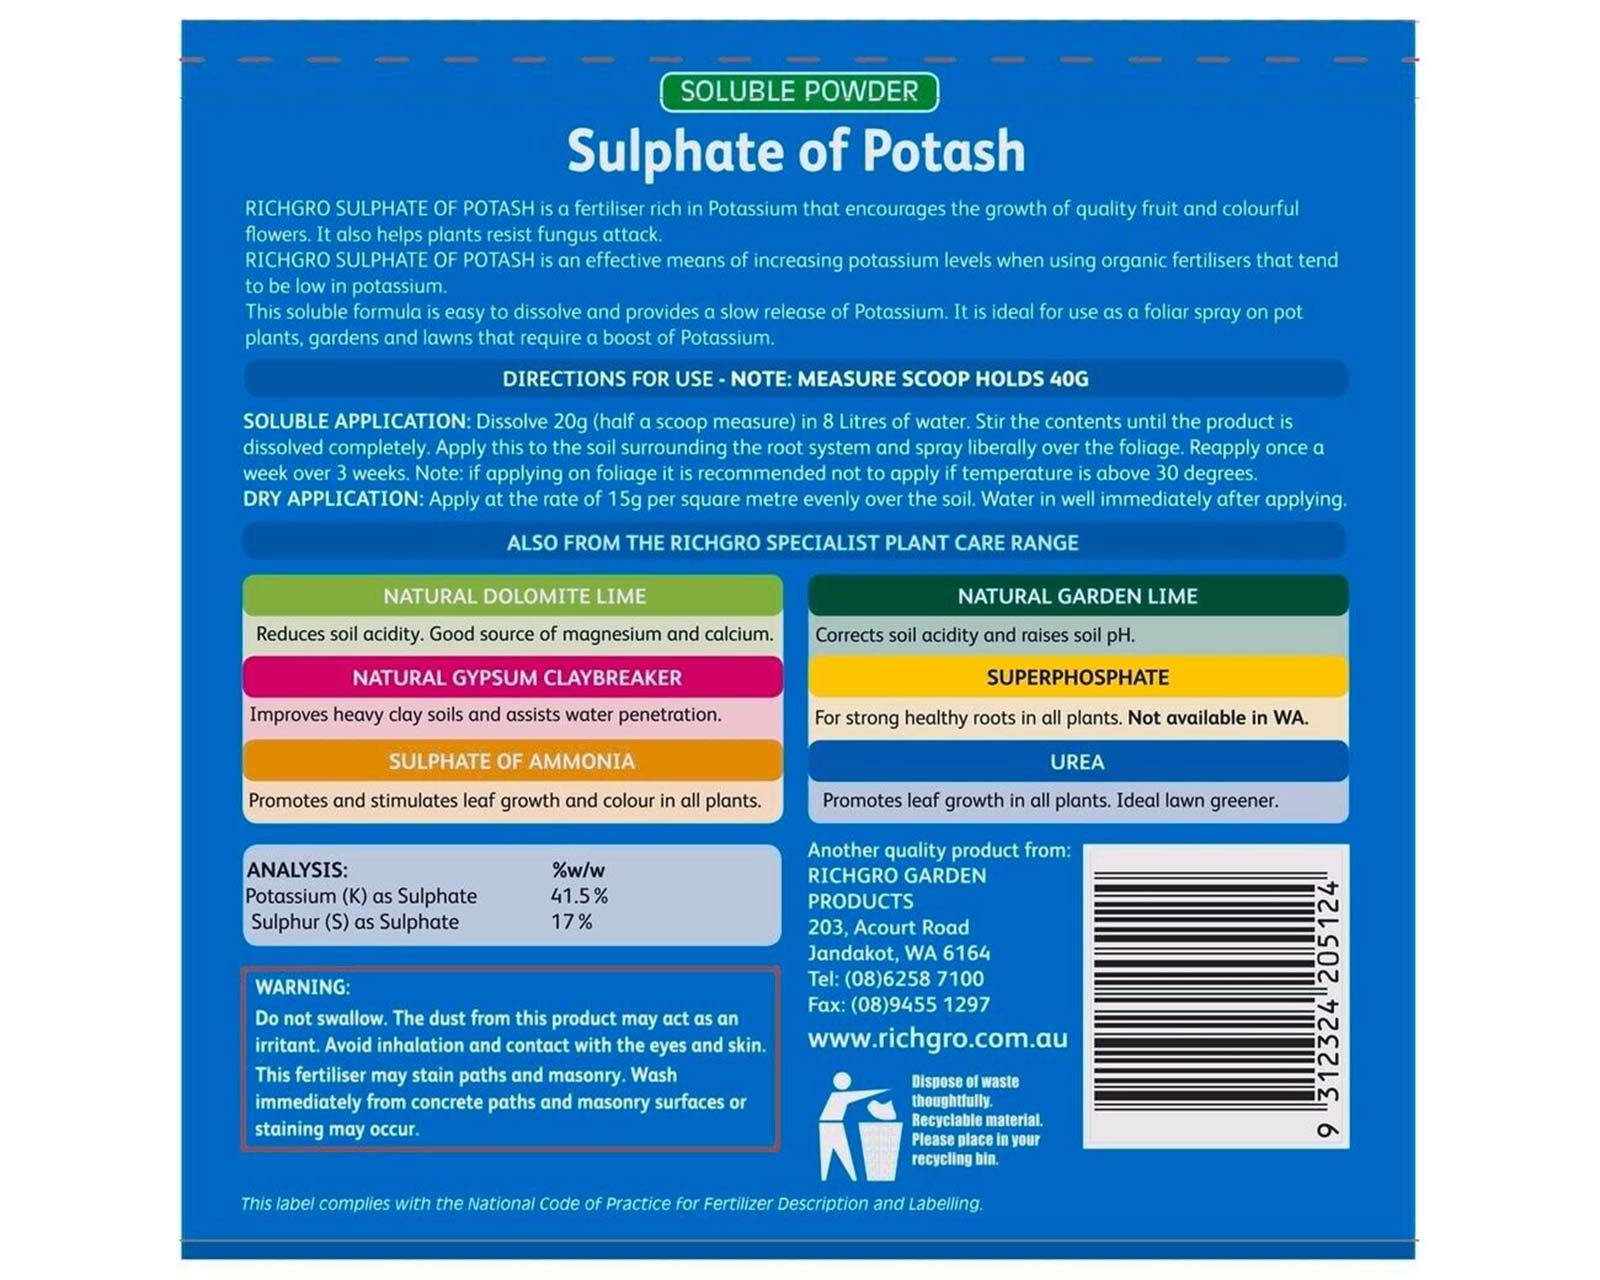 Richgro Sulphate of Potash - Directions for use